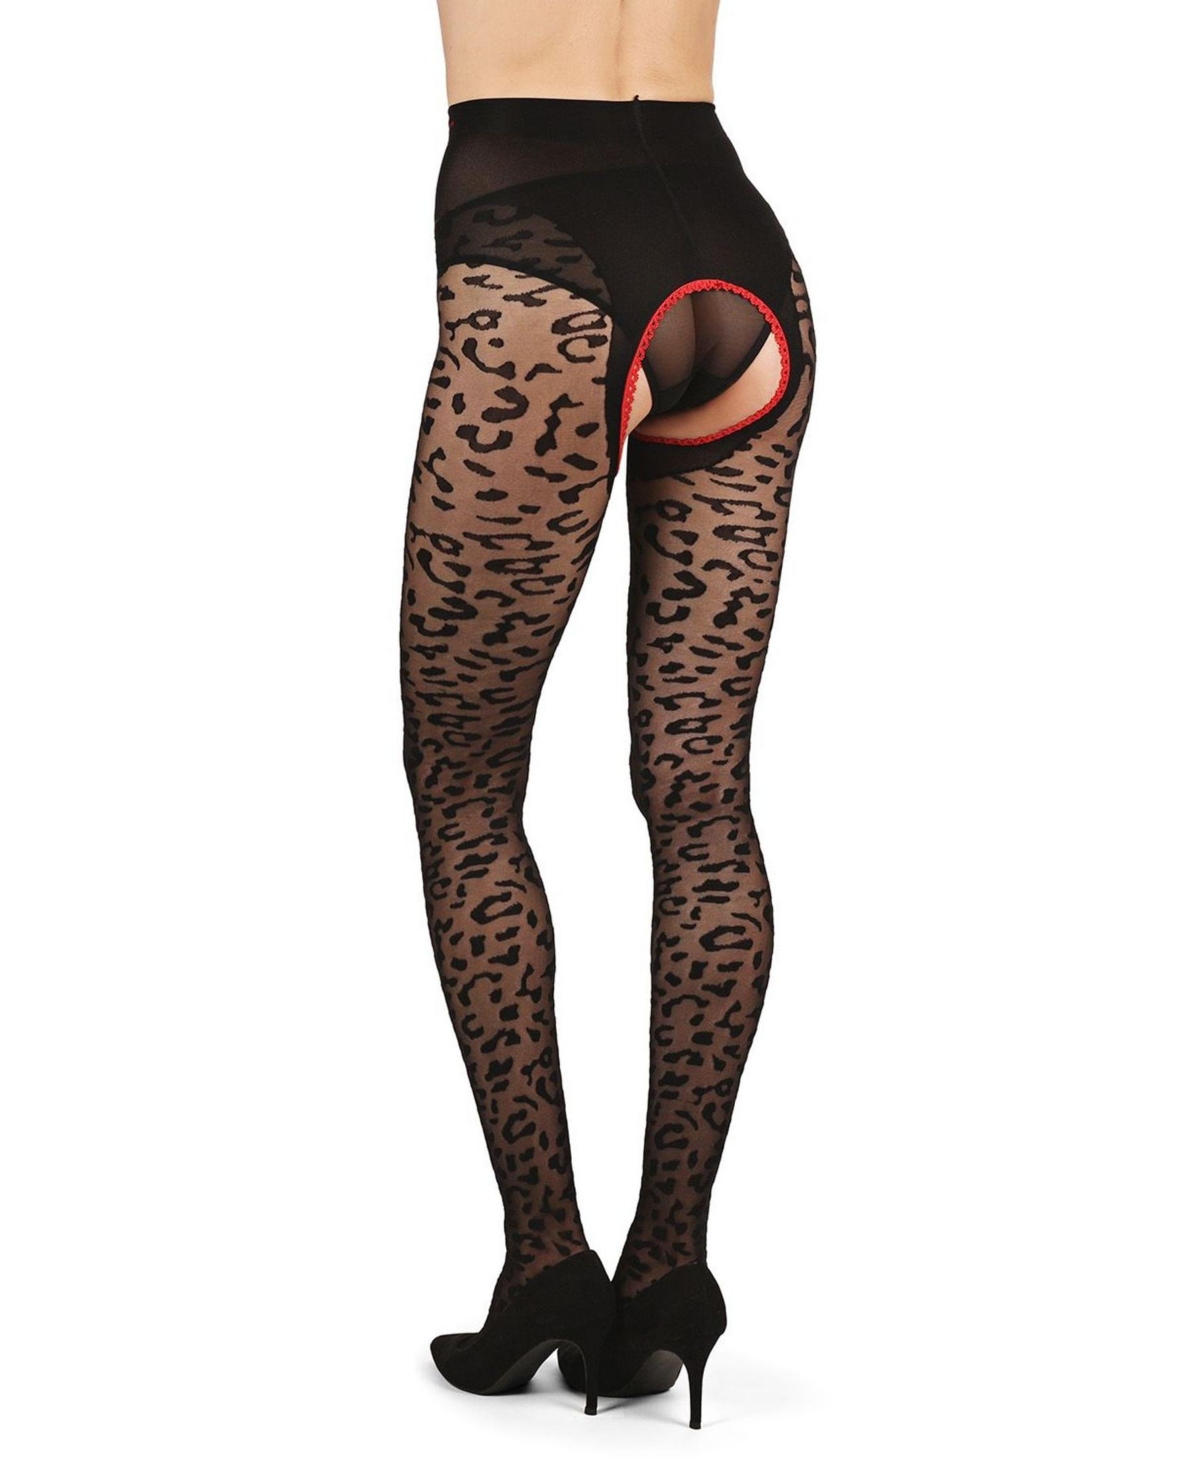 Shop Memoi Women's Born To Be Wild Leopard Crotchless Sheer Pantyhose In Multi